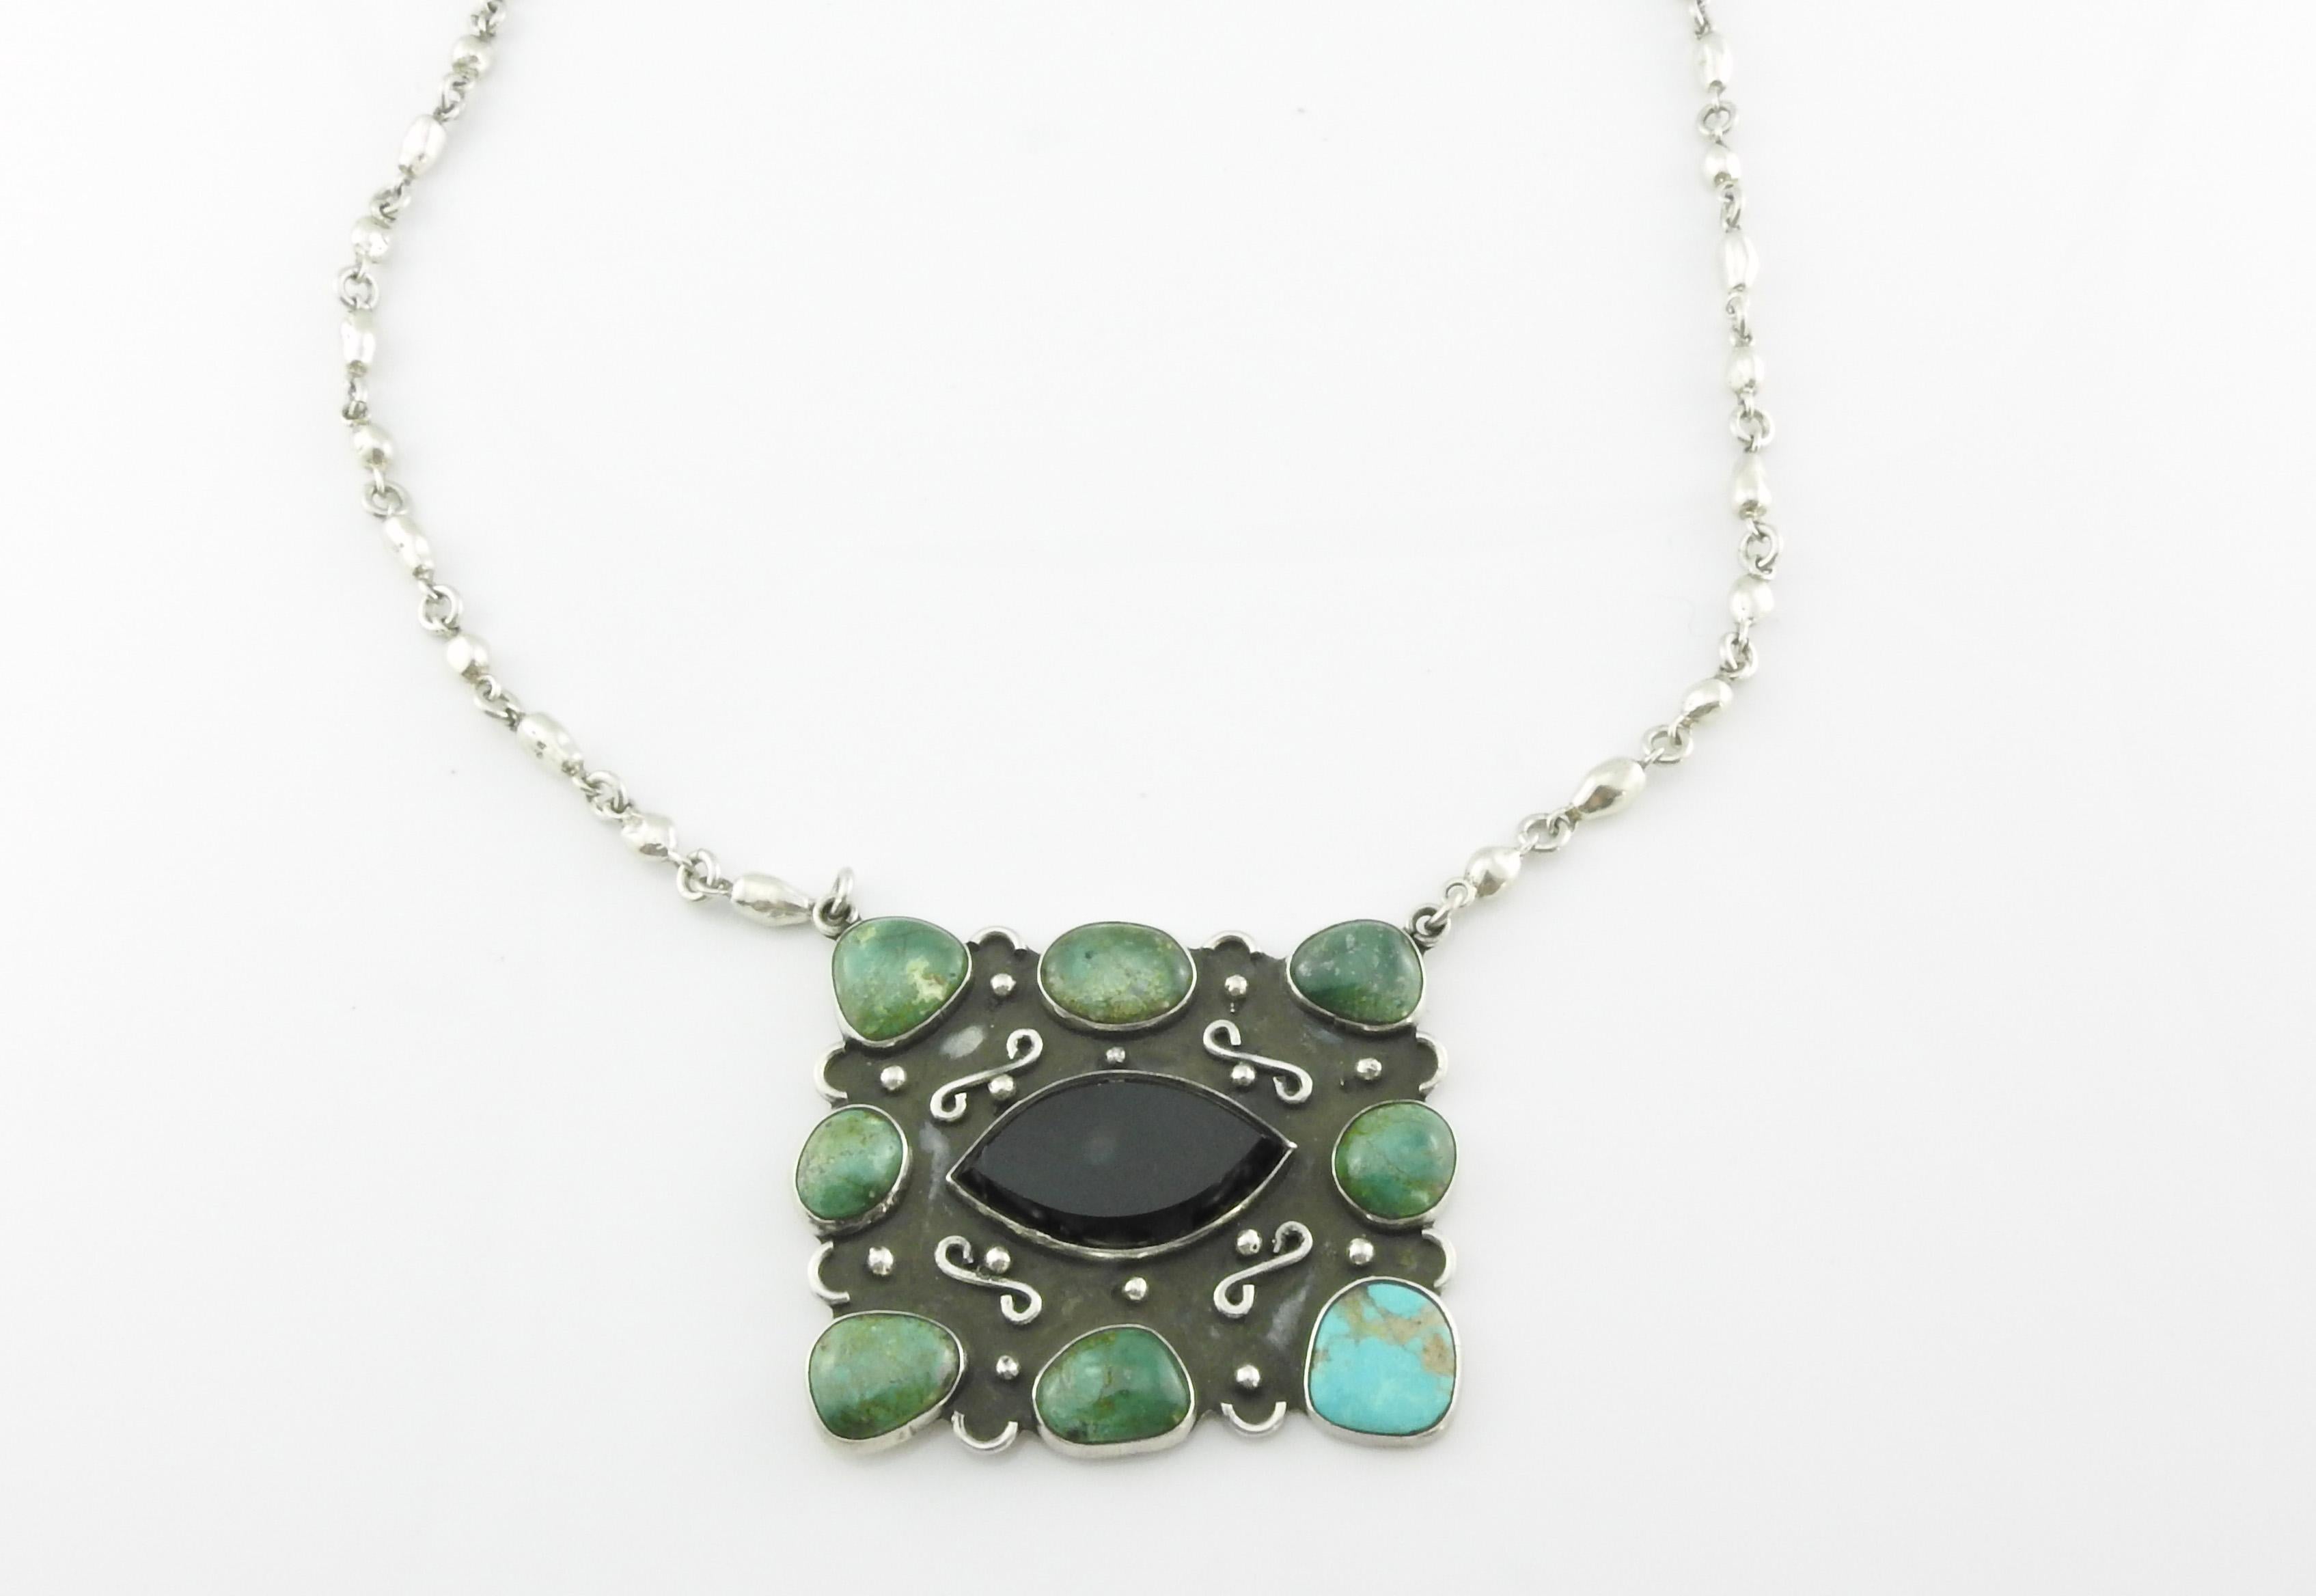 Taxco Mexico sterling silver with onyx and turquoise panel pendant necklace by Rodolfo Espinoza.

Marked: REH TE-06 Taxco

Measures: 20